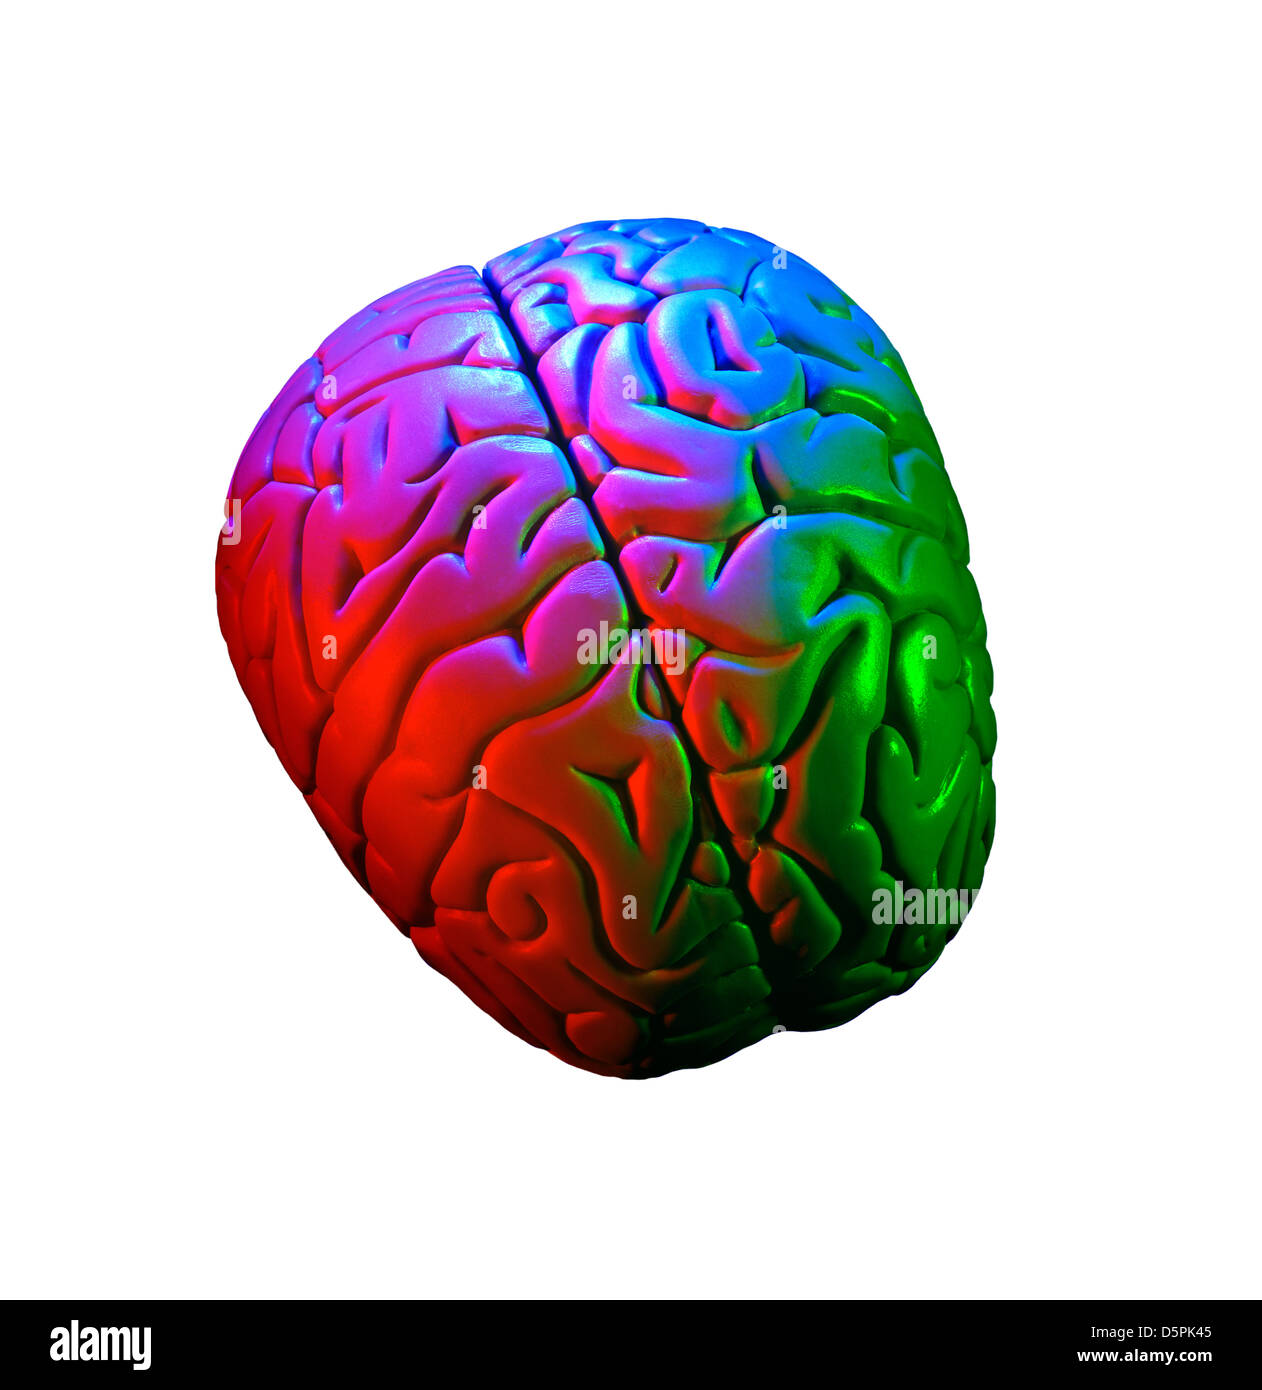 A lifesized model human brain, photographed with coloured flash. Stock Photo